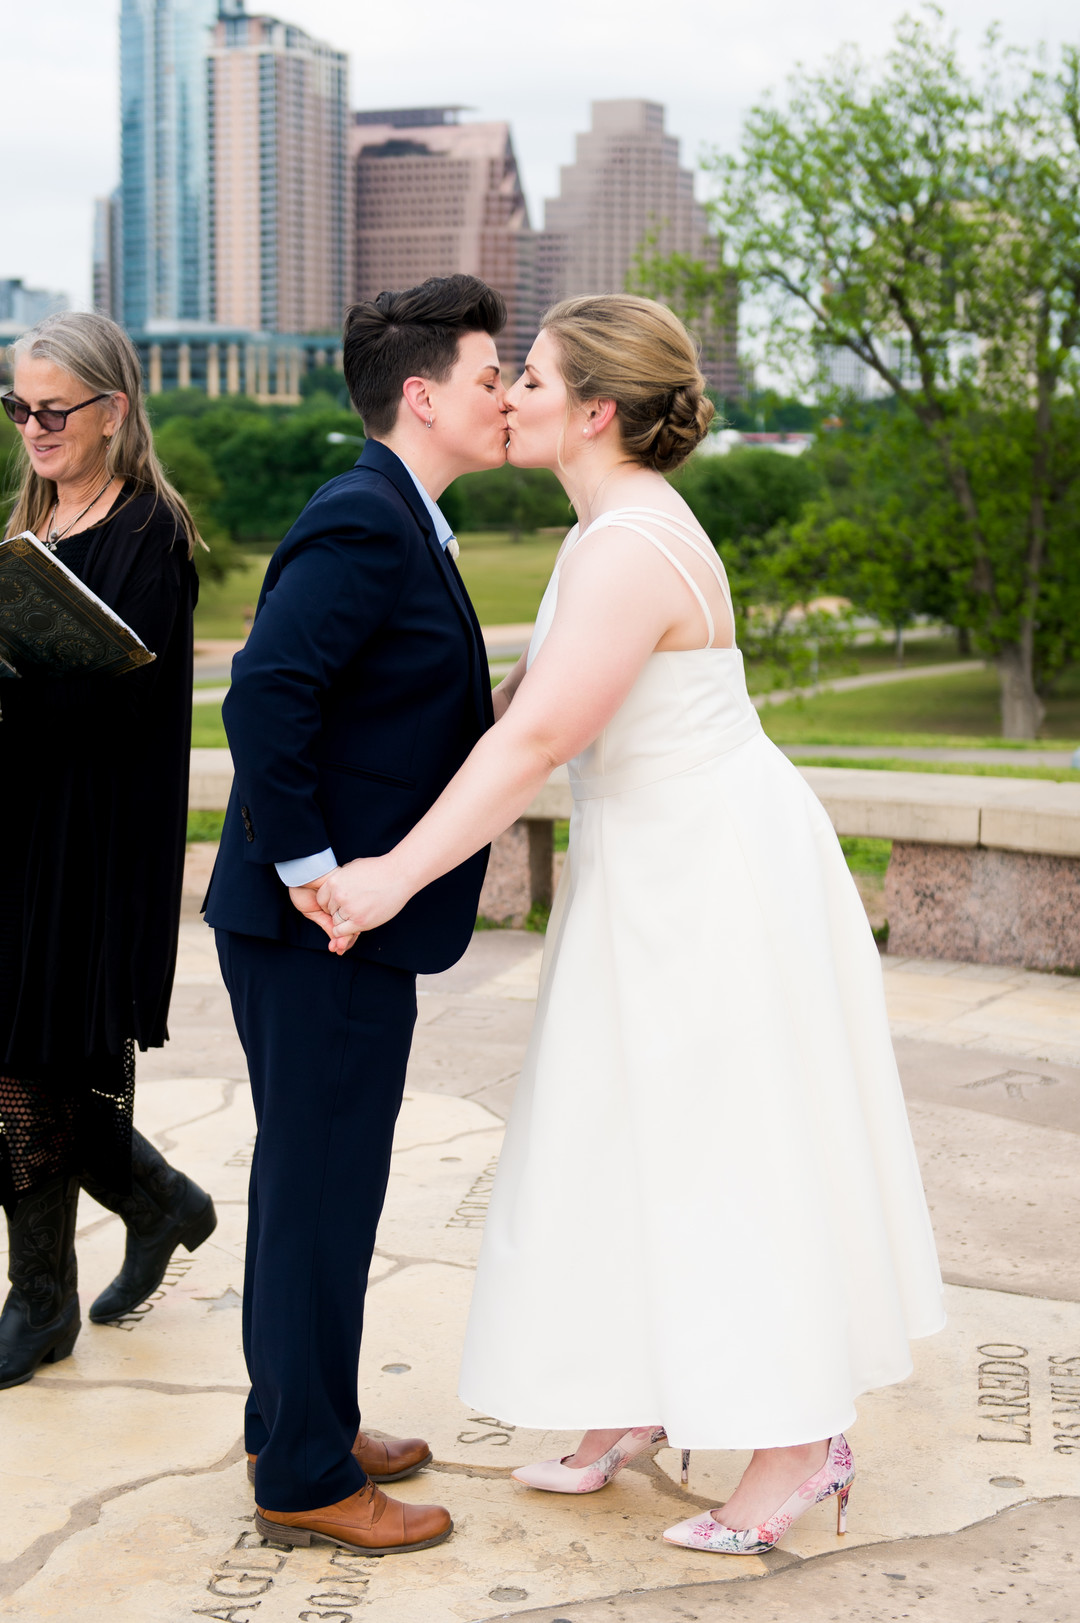 Intimate spring wedding at Butler Park in Austin, Texas LGBTQ+ weddings lesbian wedding two brides white dress navy blue suit kiss vows